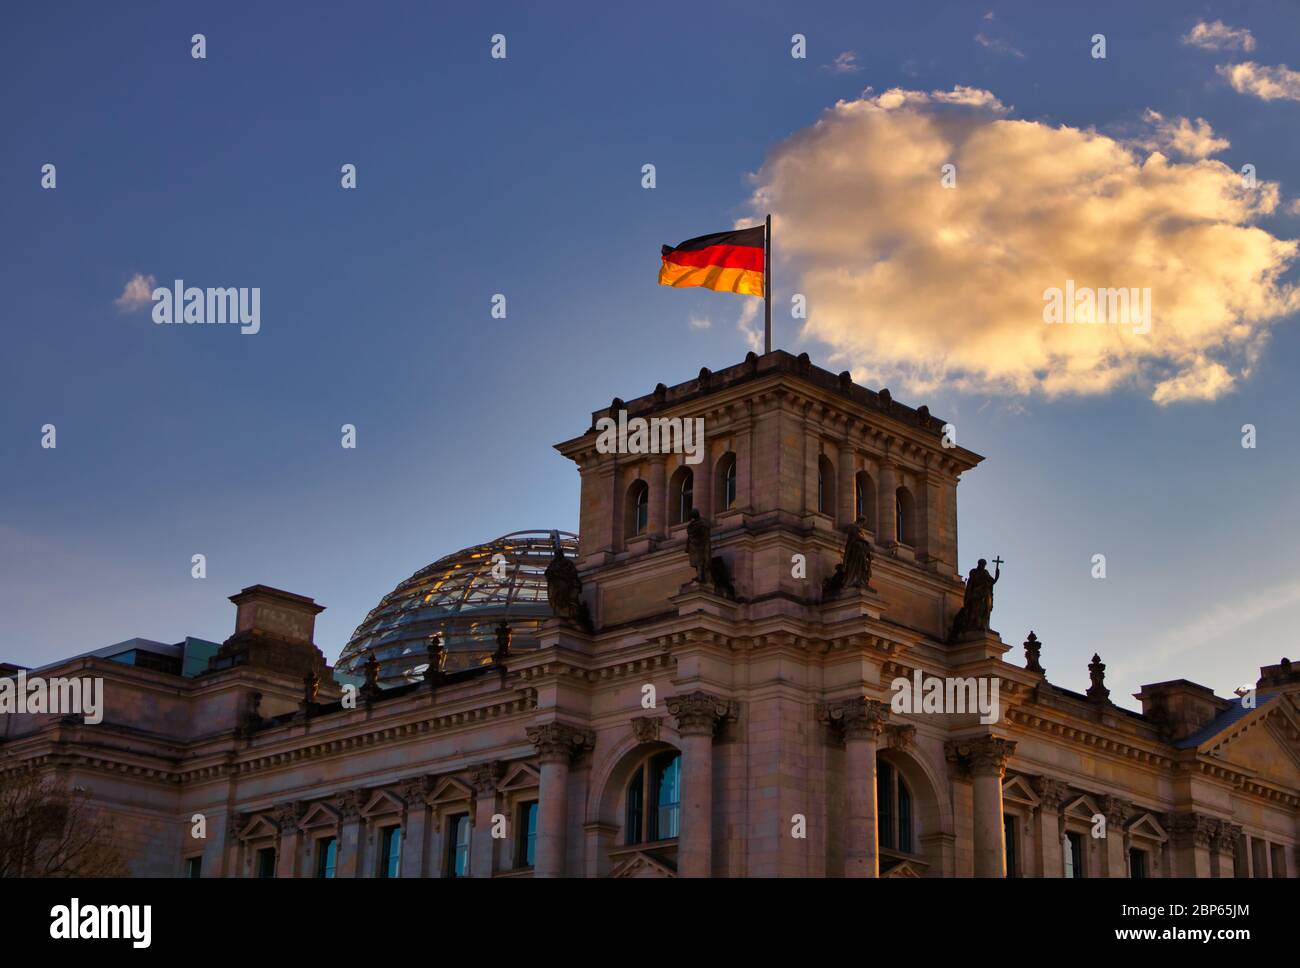 The famous Reichstag building in Berlin, seat of the German Bundestag, with a waving flag of the Federal Republic of Germany Stock Photo